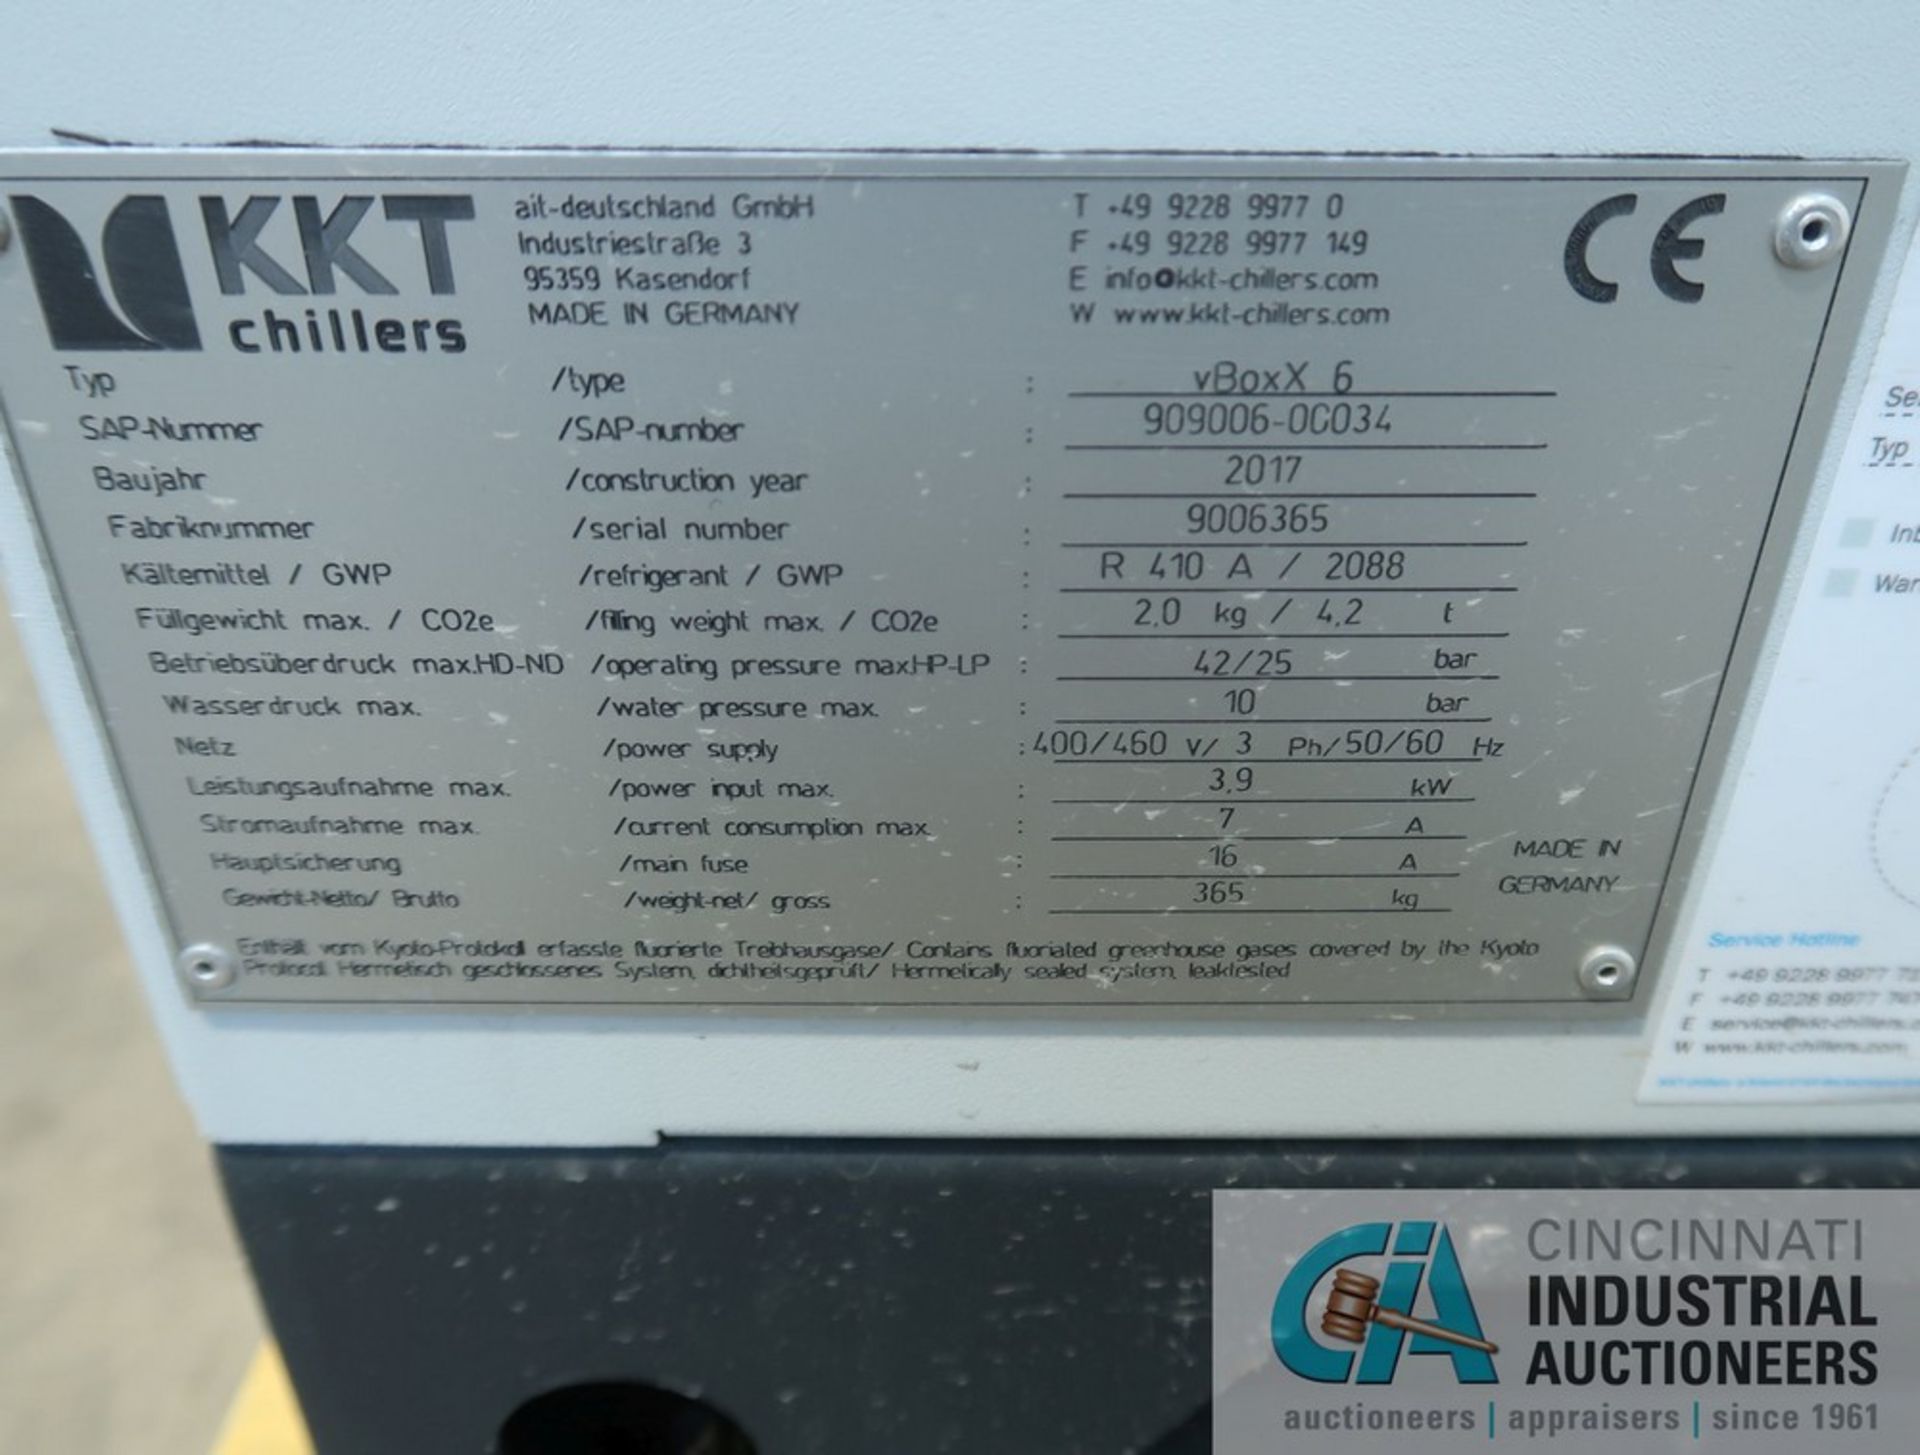 2017 KKT CHILLERS MODEL VBOX X6 VARIO-LINE CHILLER - Appears to be New, Never put in service; S/N - Image 6 of 6